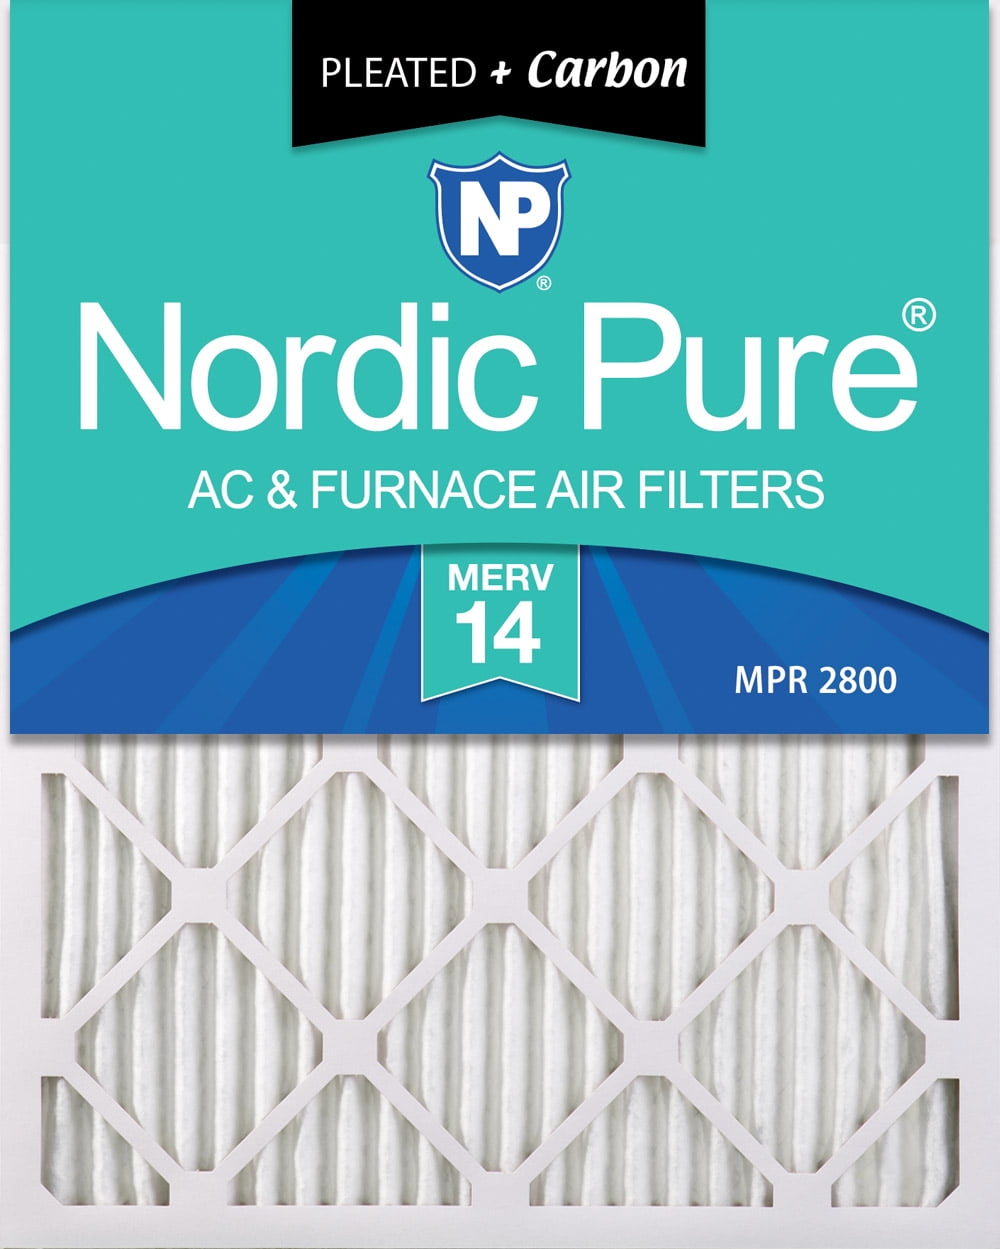 3 Pack 3 Piece Nordic Pure 12x18x1 MERV 12 Pleated AC Furnace Air Filters